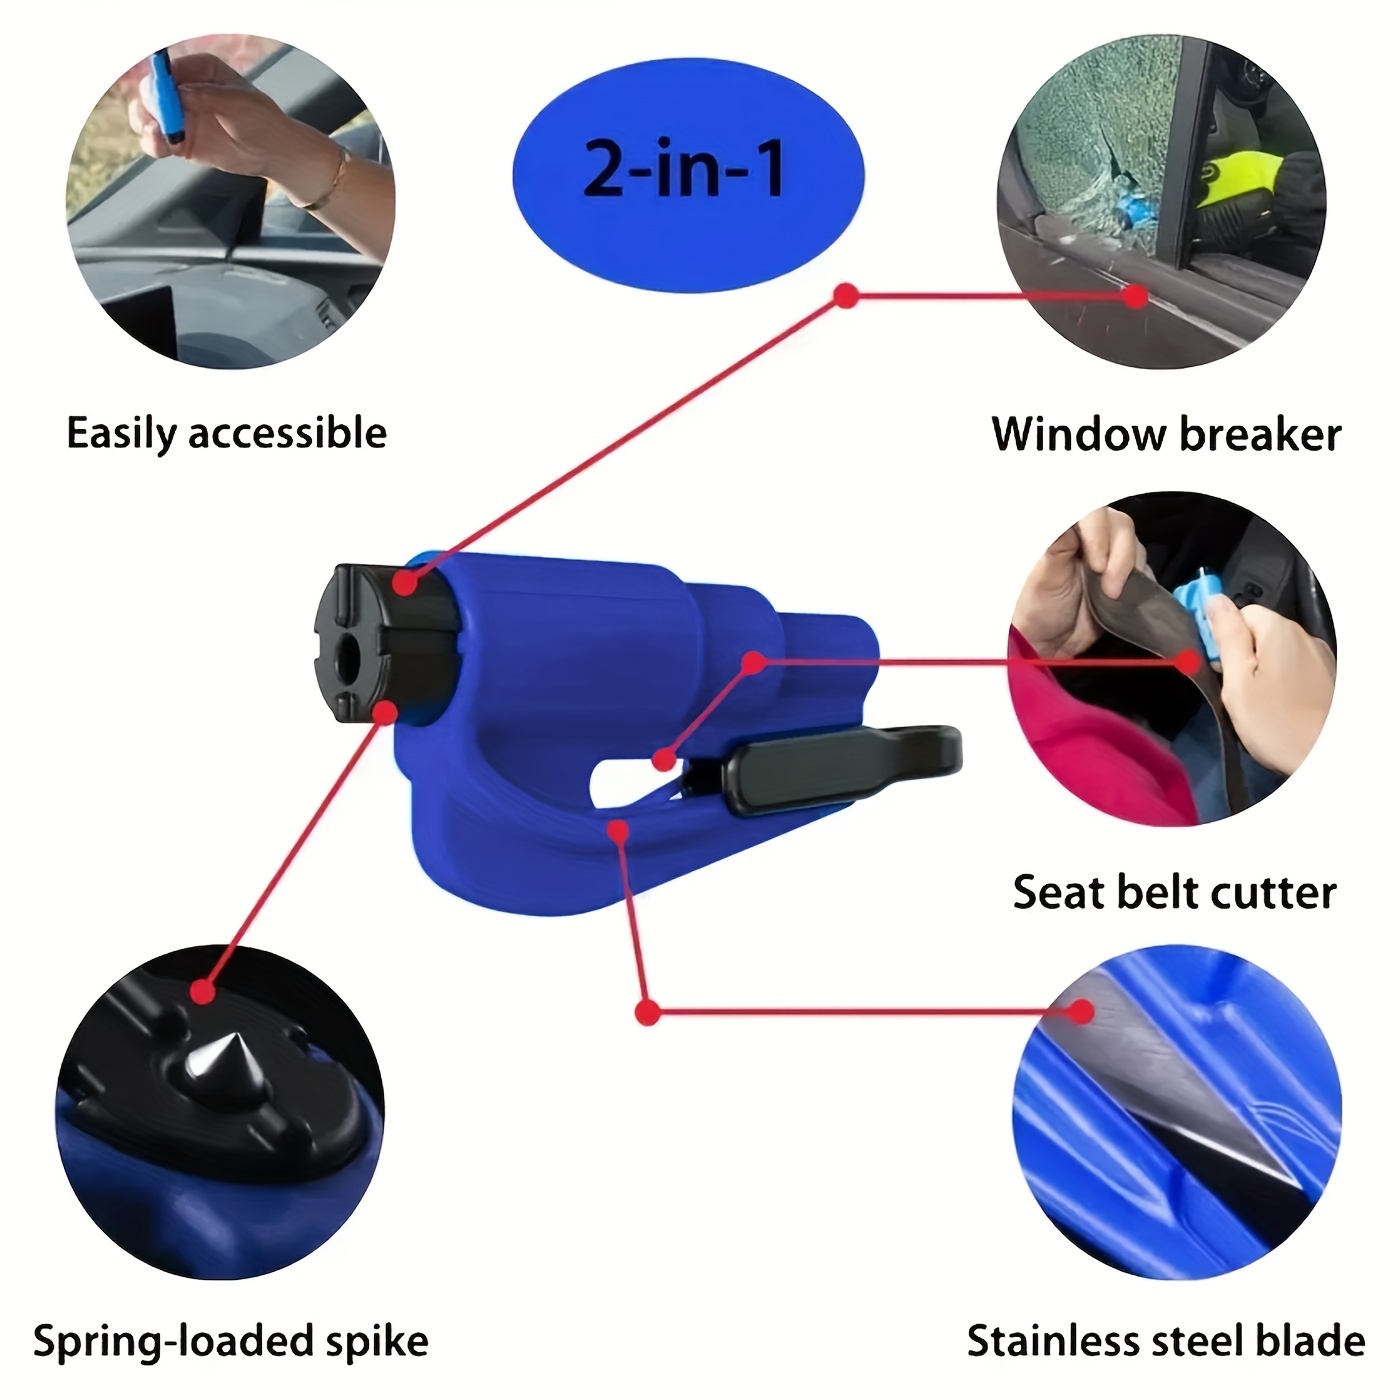 2 in 1 emergency car escape tool safety belt cutter metal safety hammer save your life in an emergency details 5